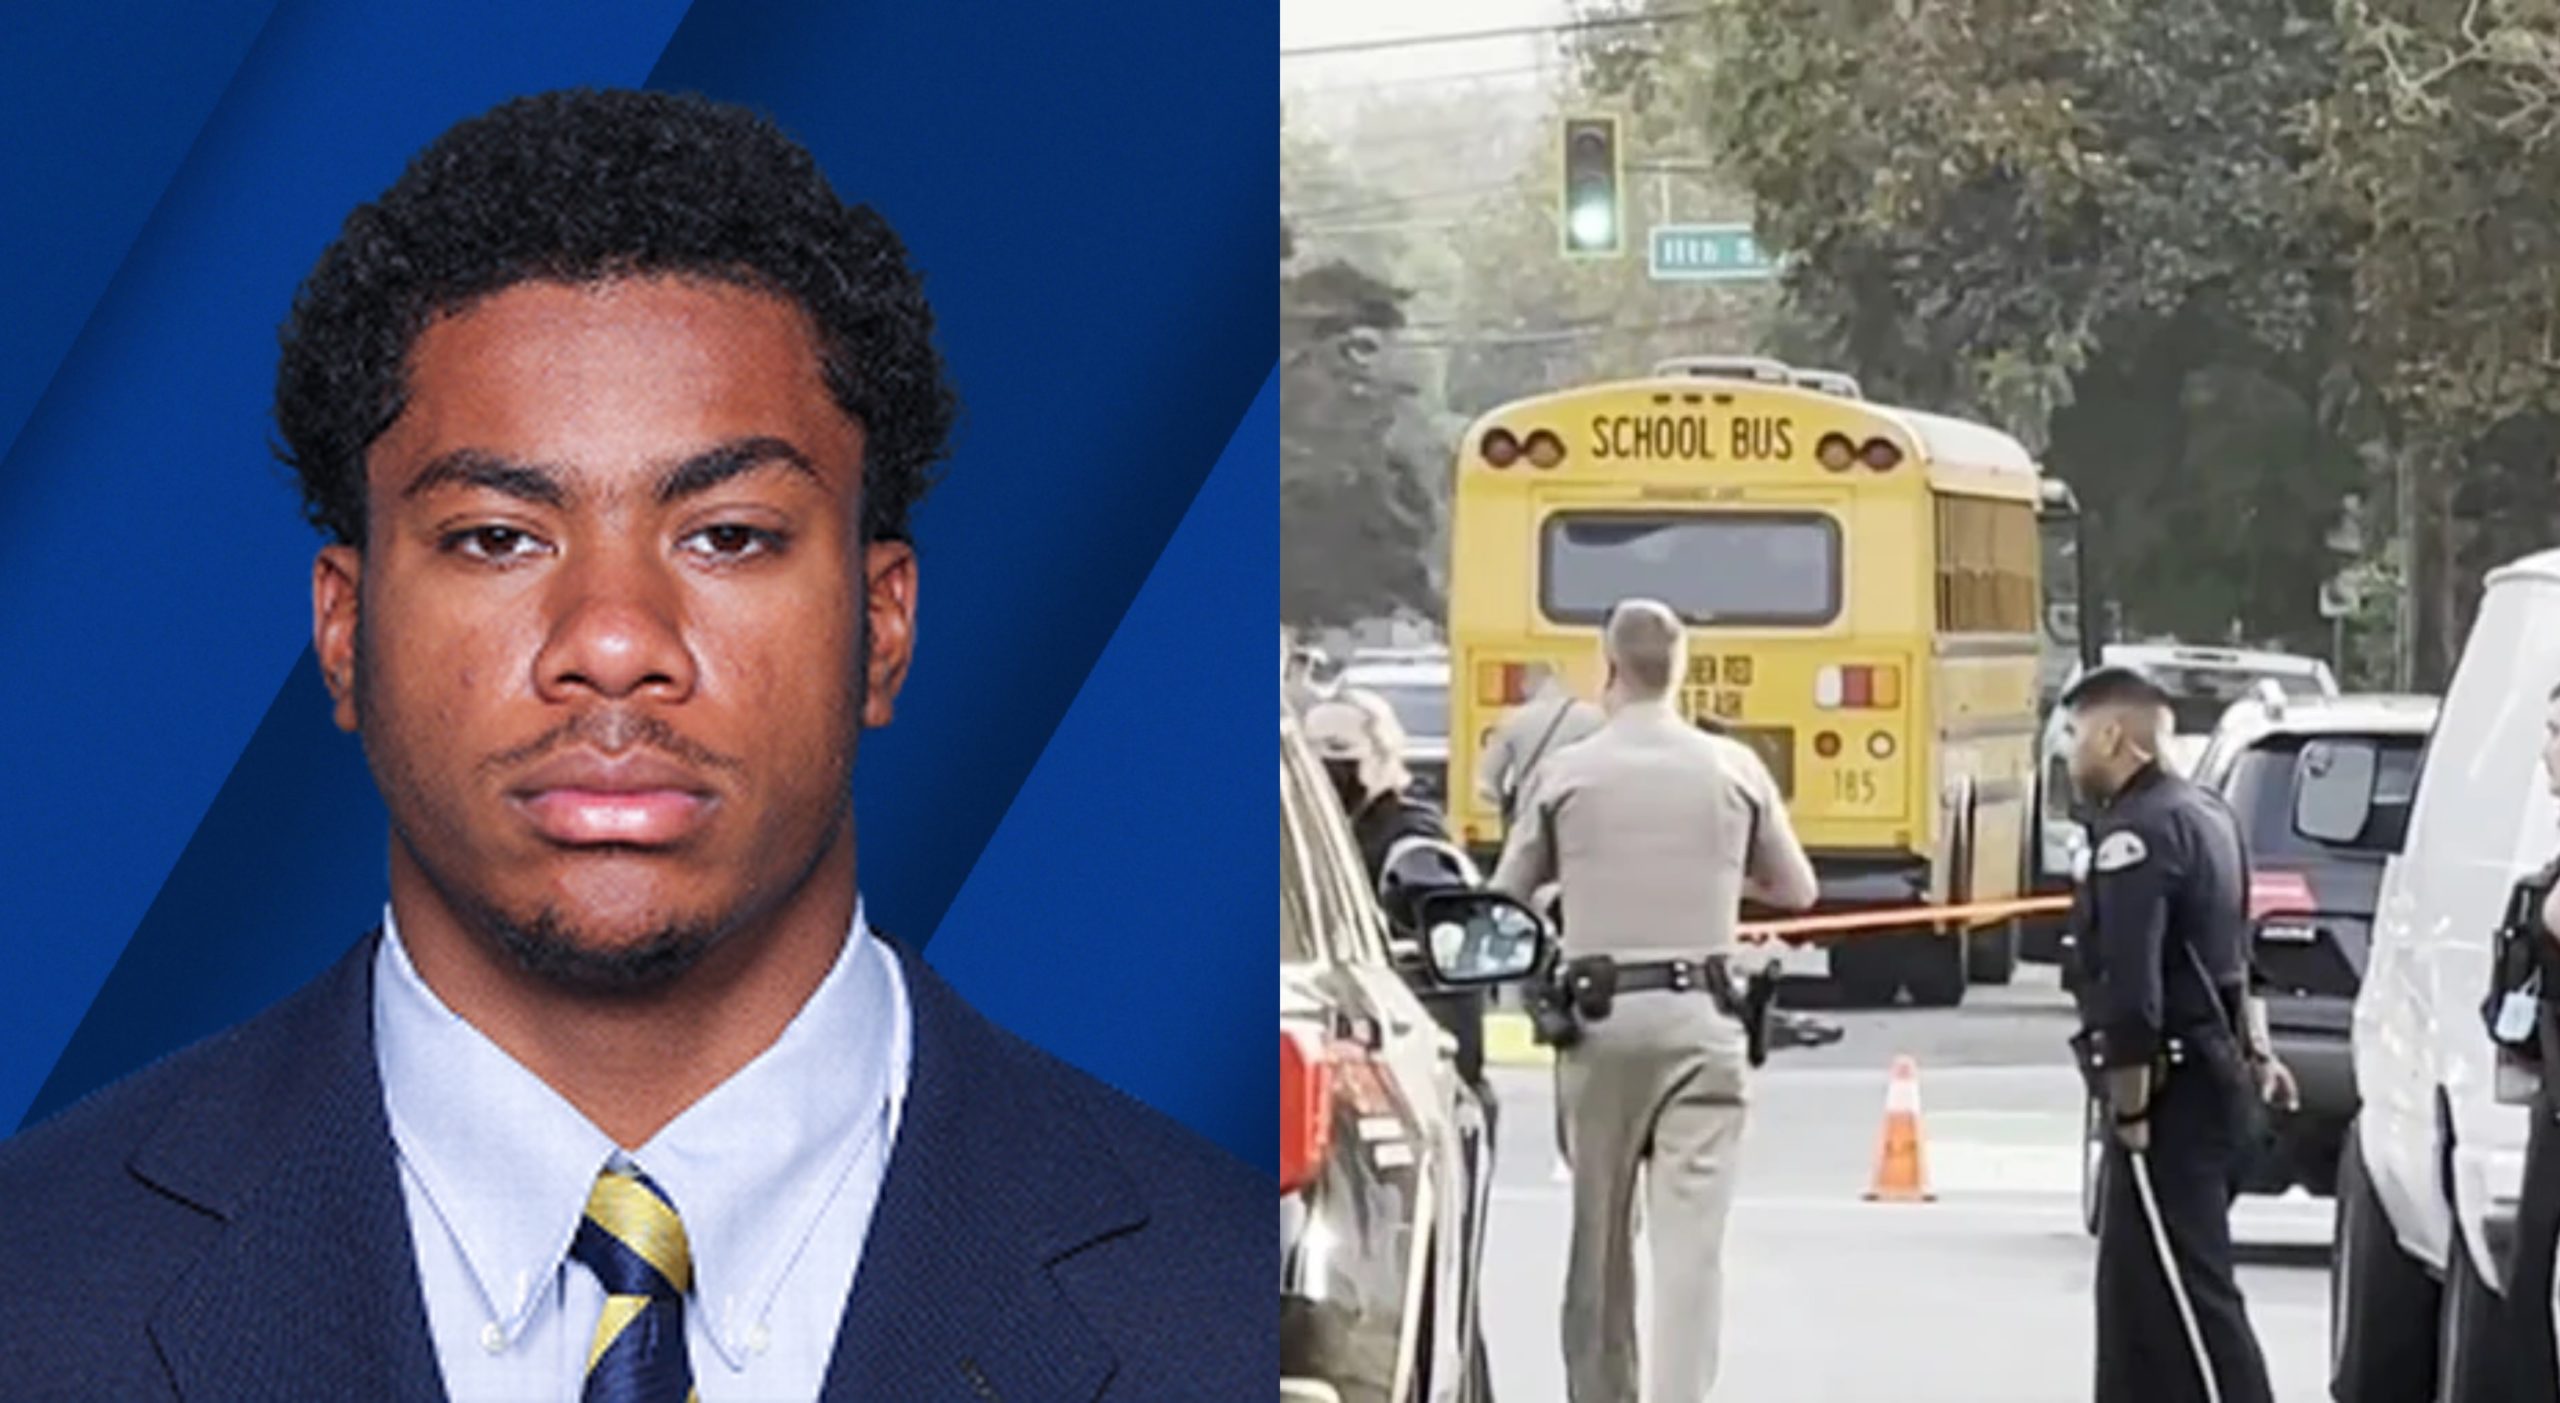 San Jose State RB Killed After Being Struck By A School Bus While On A